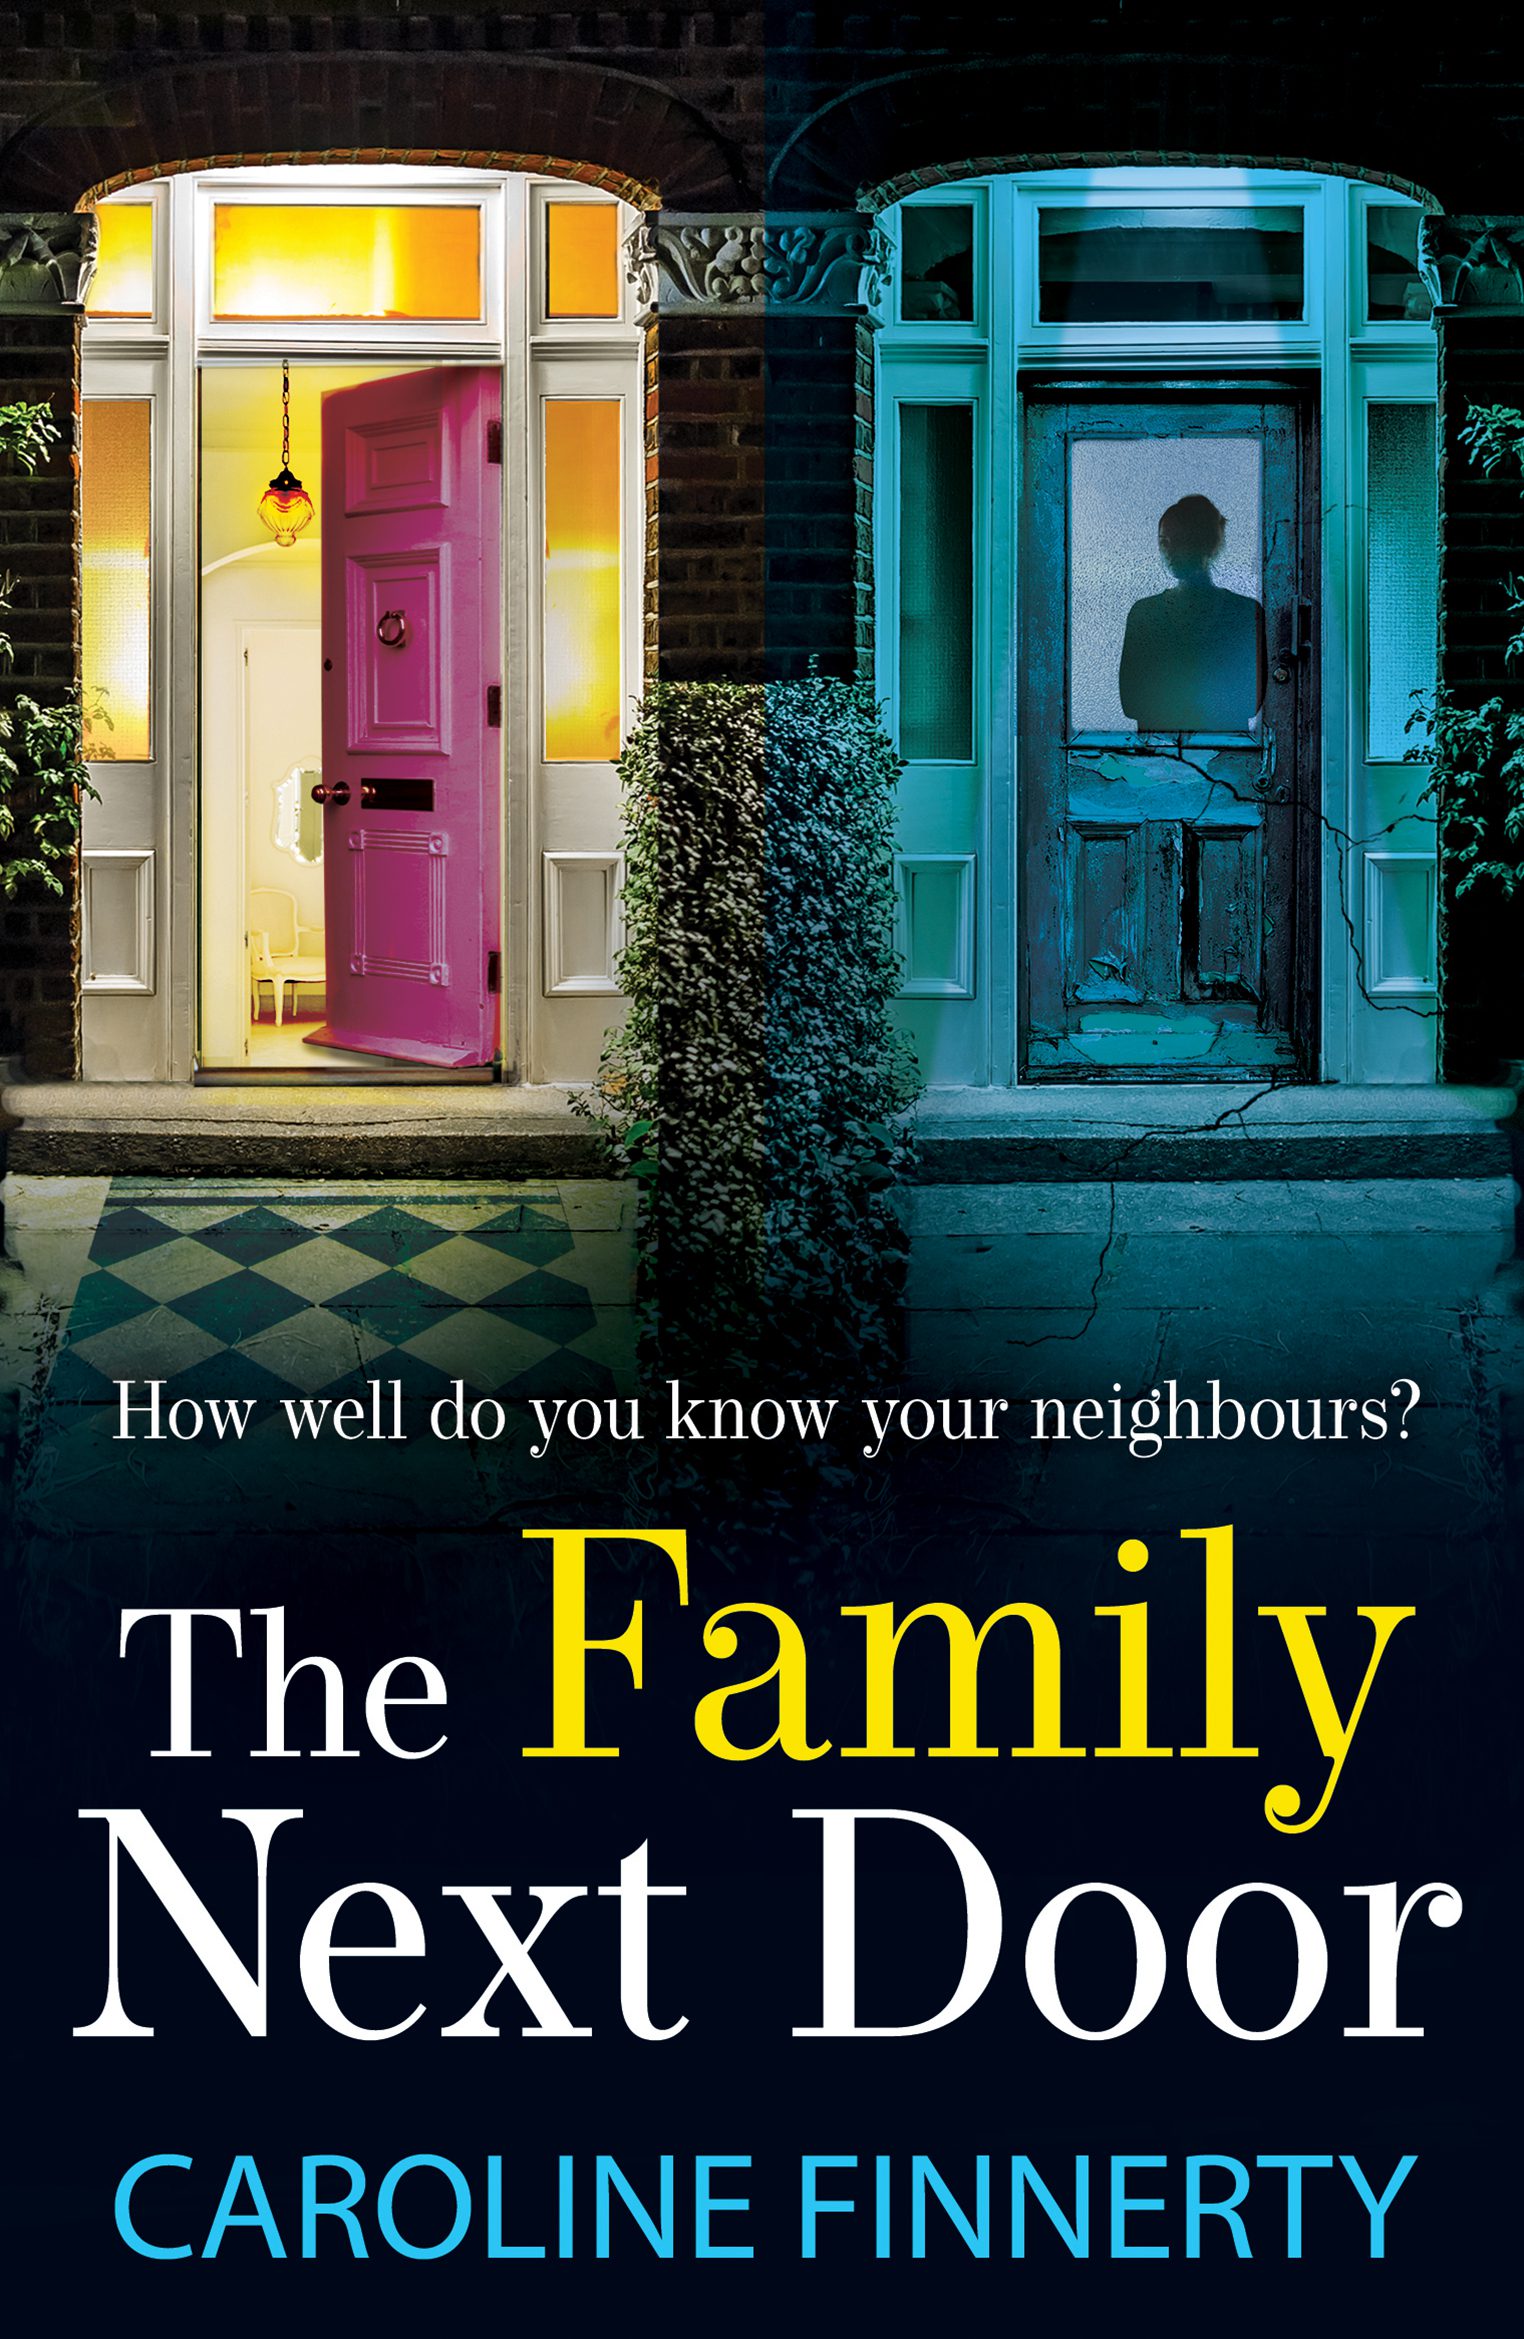 The Family Next Door book cover